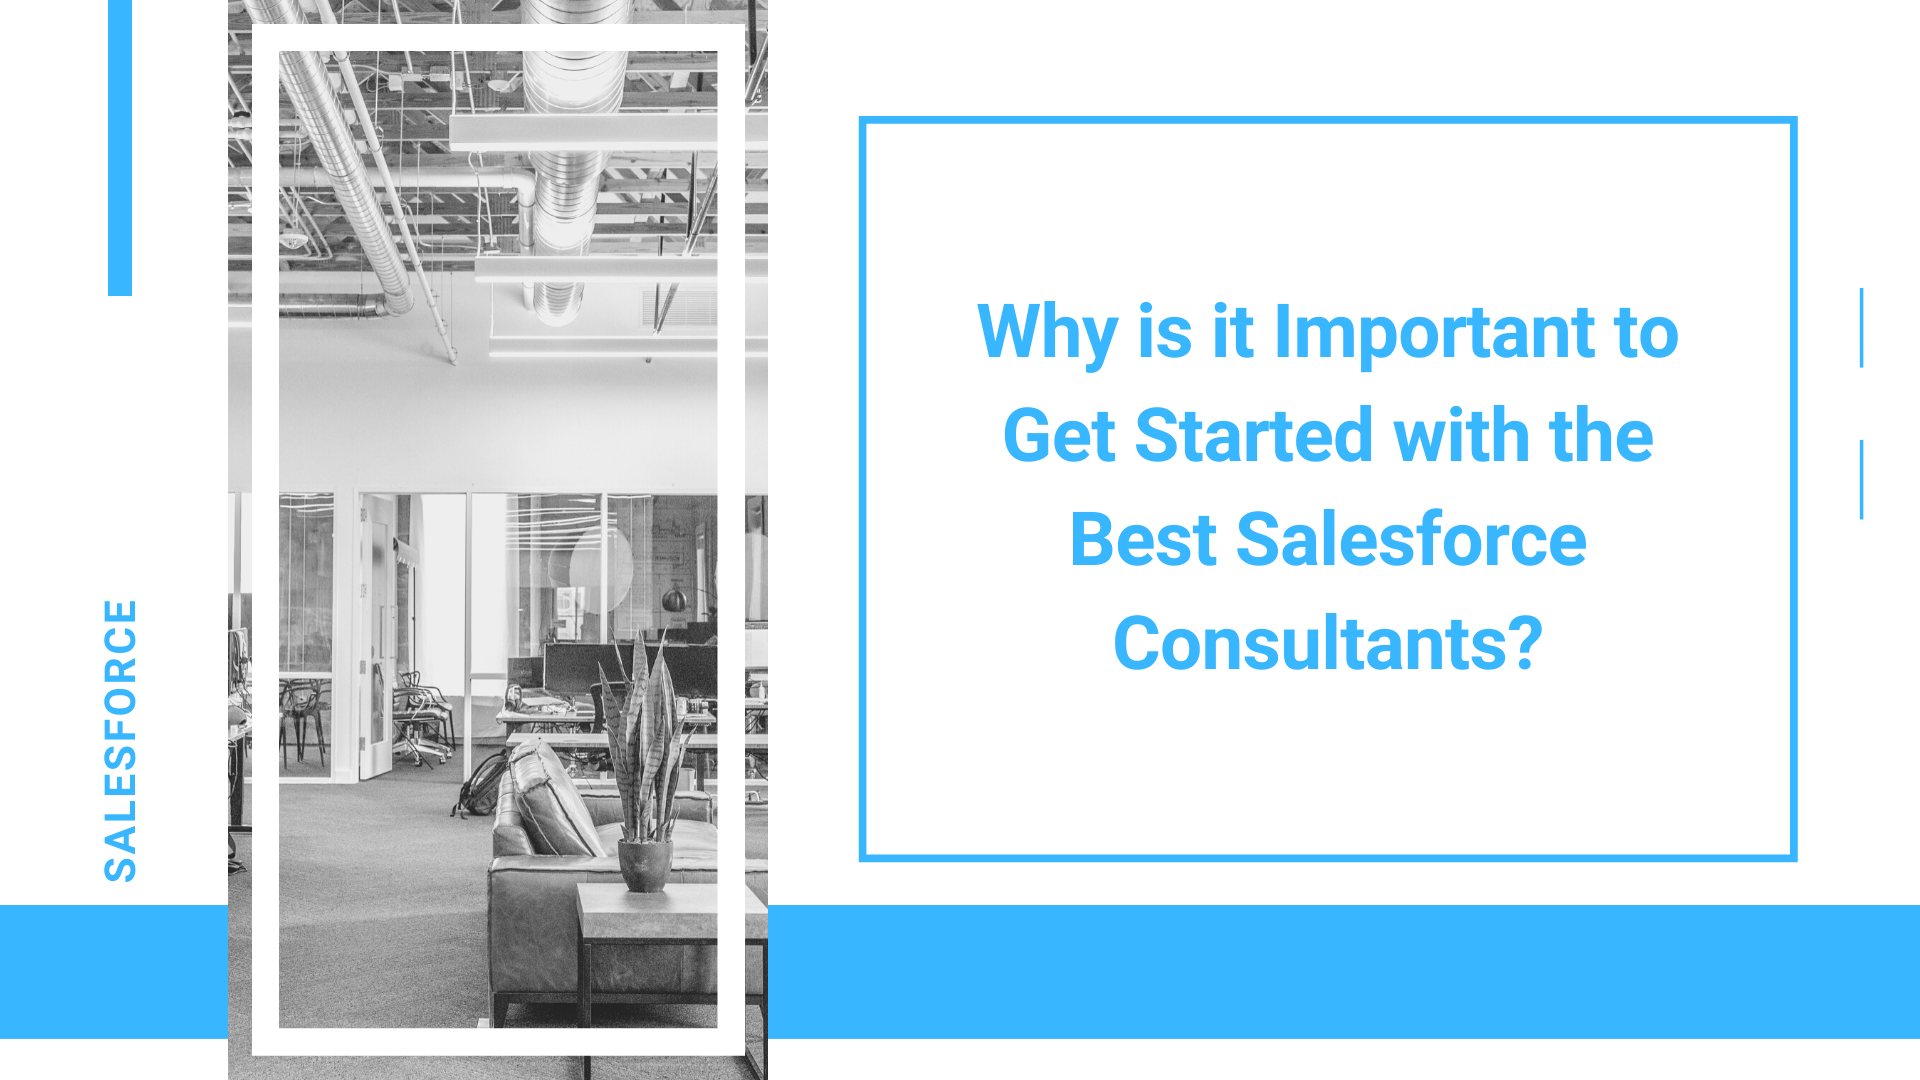 Why is it Important to Get Started with the Best Salesforce Consultants